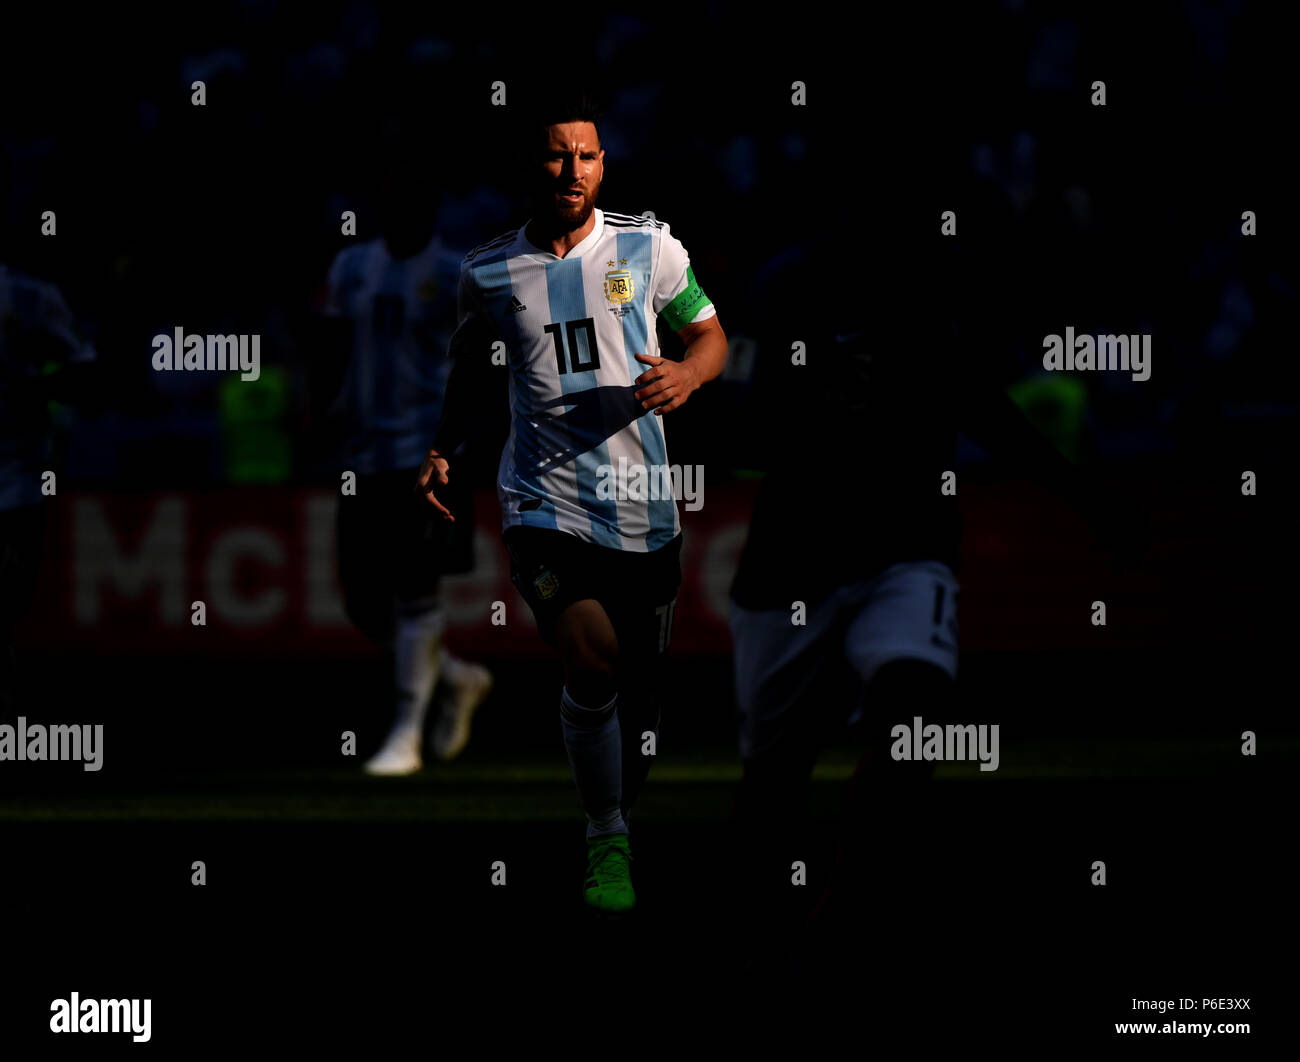 (180630) -- KAZAN, June 30, 2018 (Xinhua) -- Lionel Messi of Argentina competes during the 2018 FIFA World Cup round of 16 match between France and Argentina in Kazan, Russia, June 30, 2018. (Xinhua/Li Ga) Stock Photo